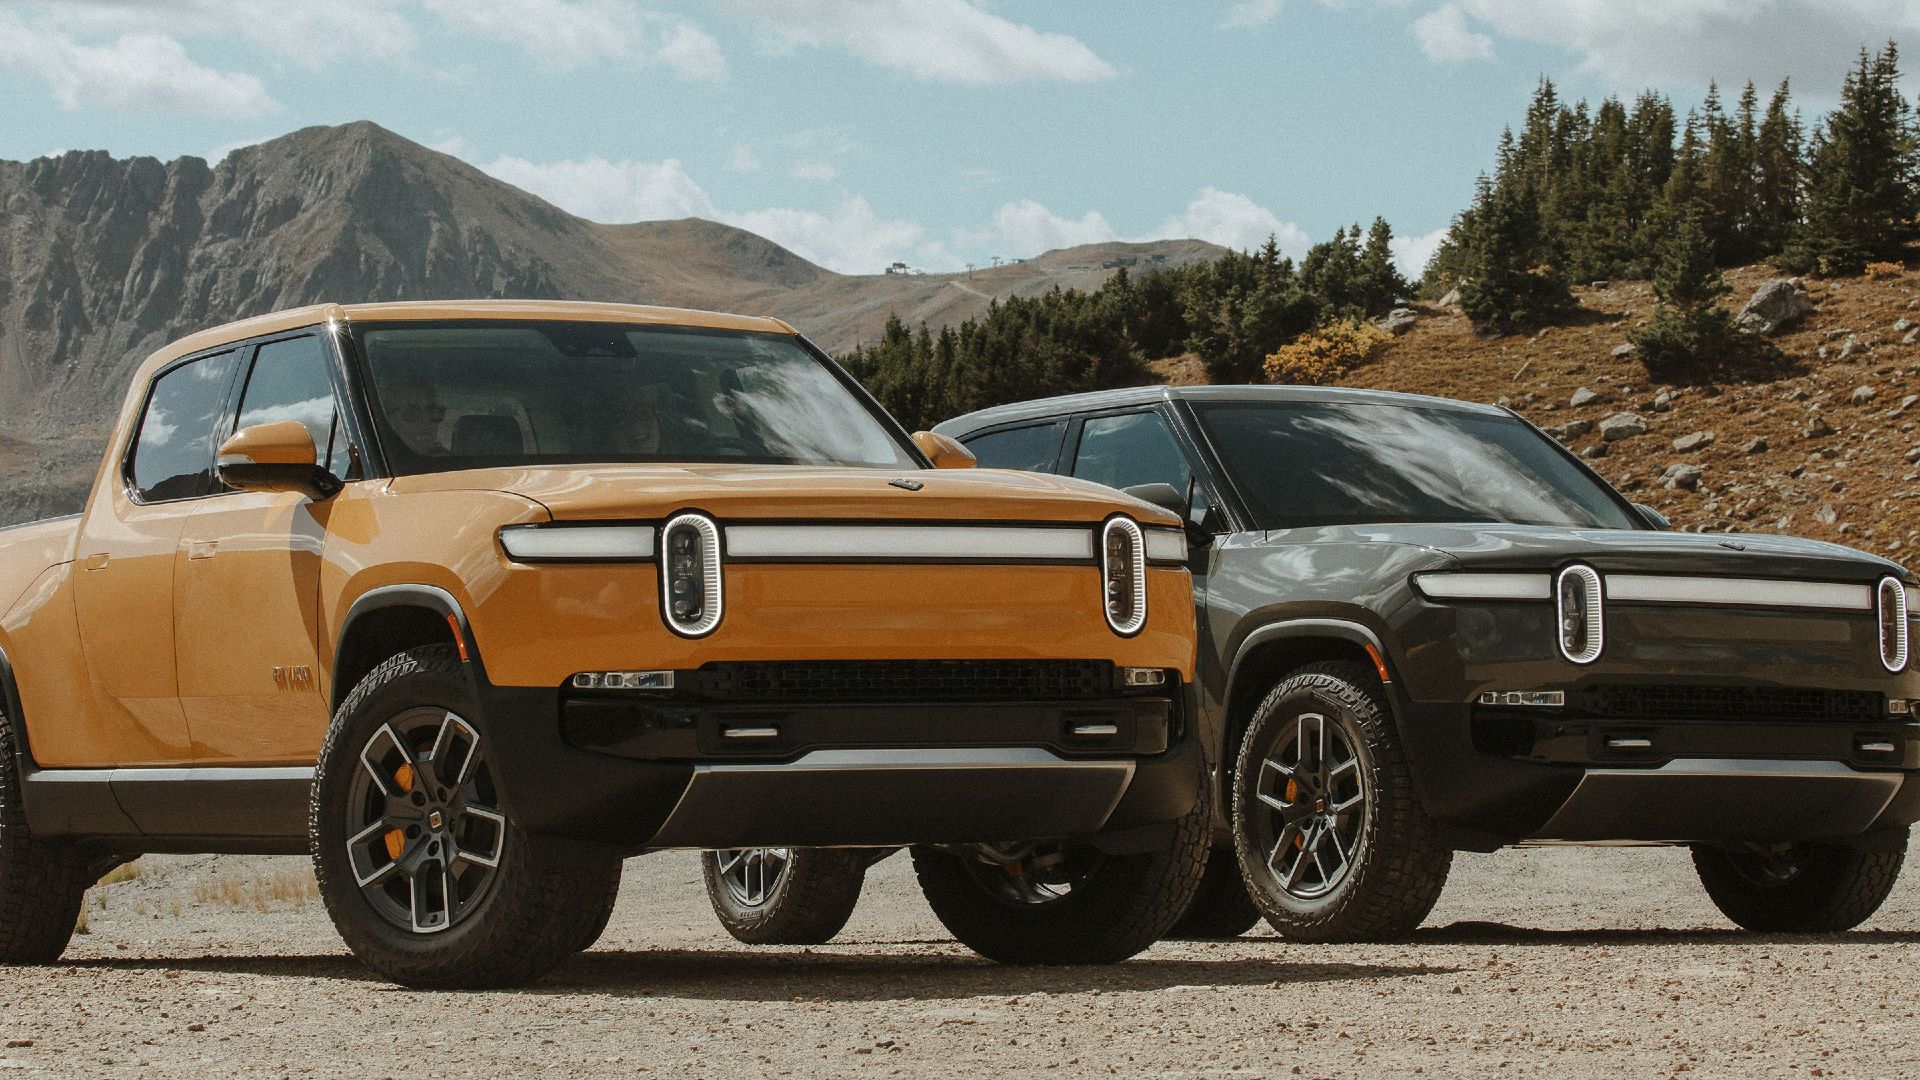 The Rivian R1T's Bluetooth Speaker Is More Than a Music Box